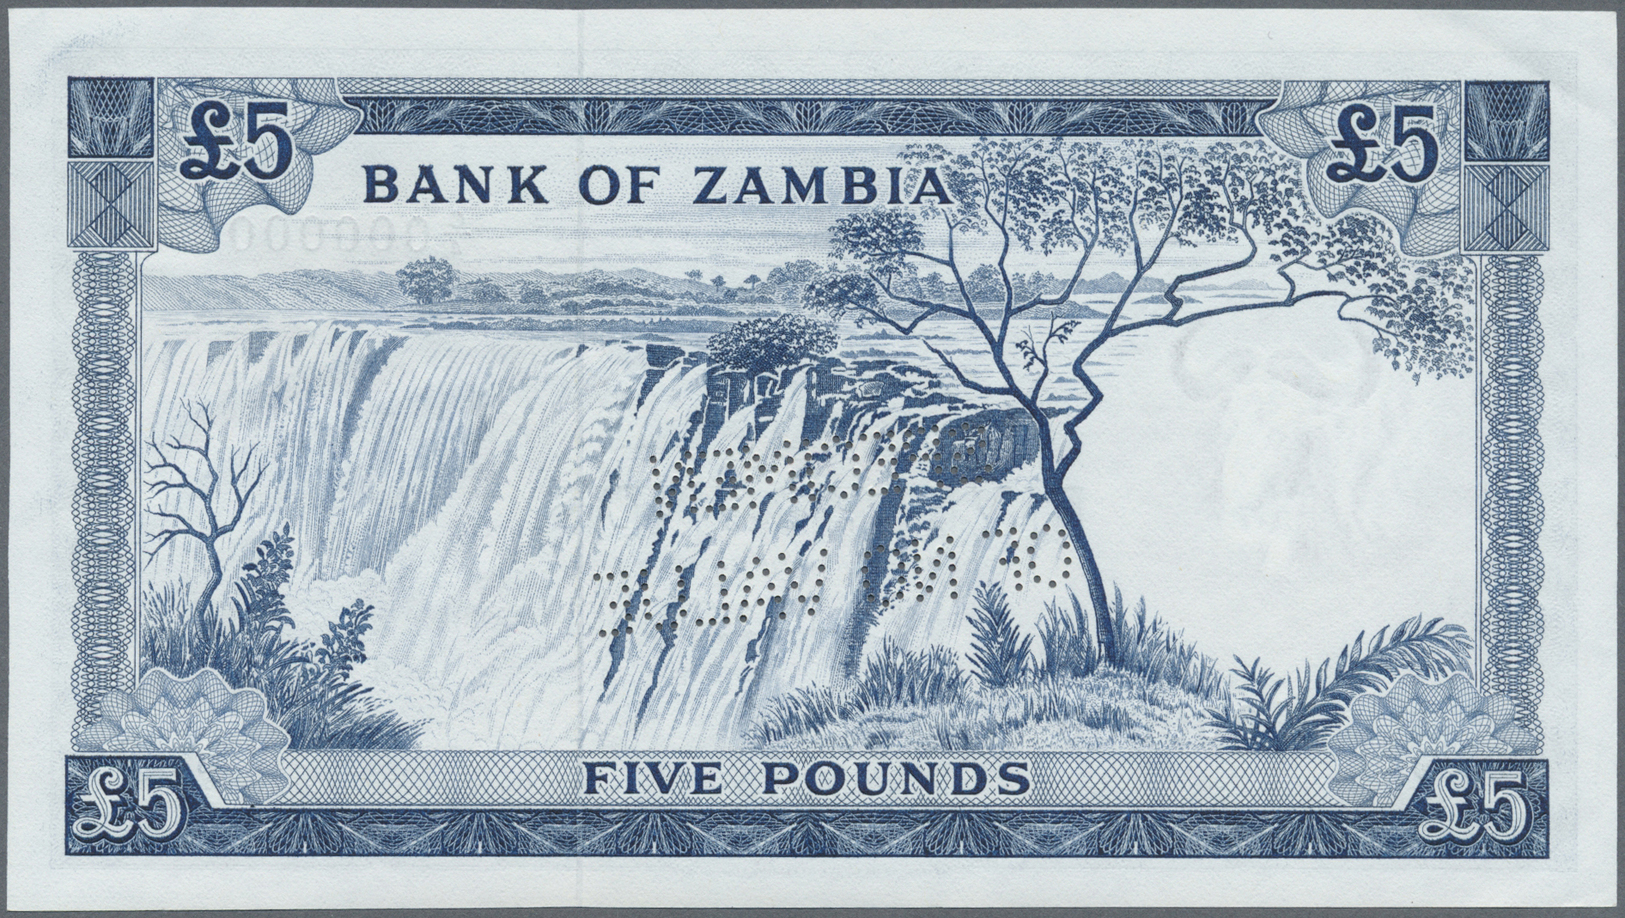 03524 Zambia / Sambia: Bank Of Zambia 5 Pounds ND(1964) SPECIMEN, P.3s With Perforation "Specimen Of No Value" At Center - Zambie